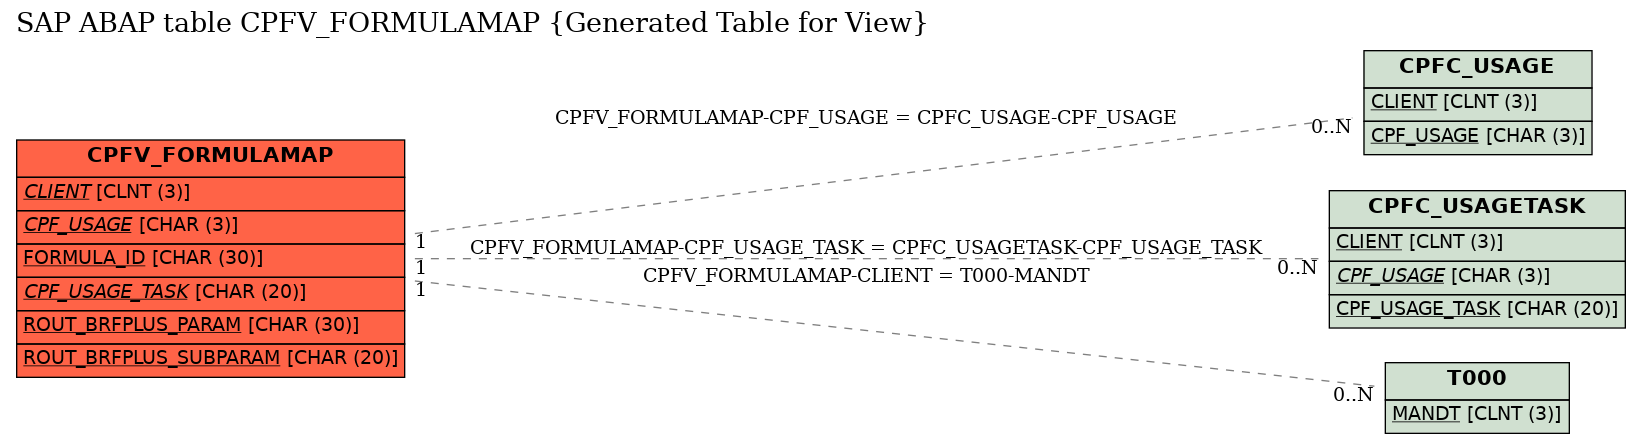 E-R Diagram for table CPFV_FORMULAMAP (Generated Table for View)